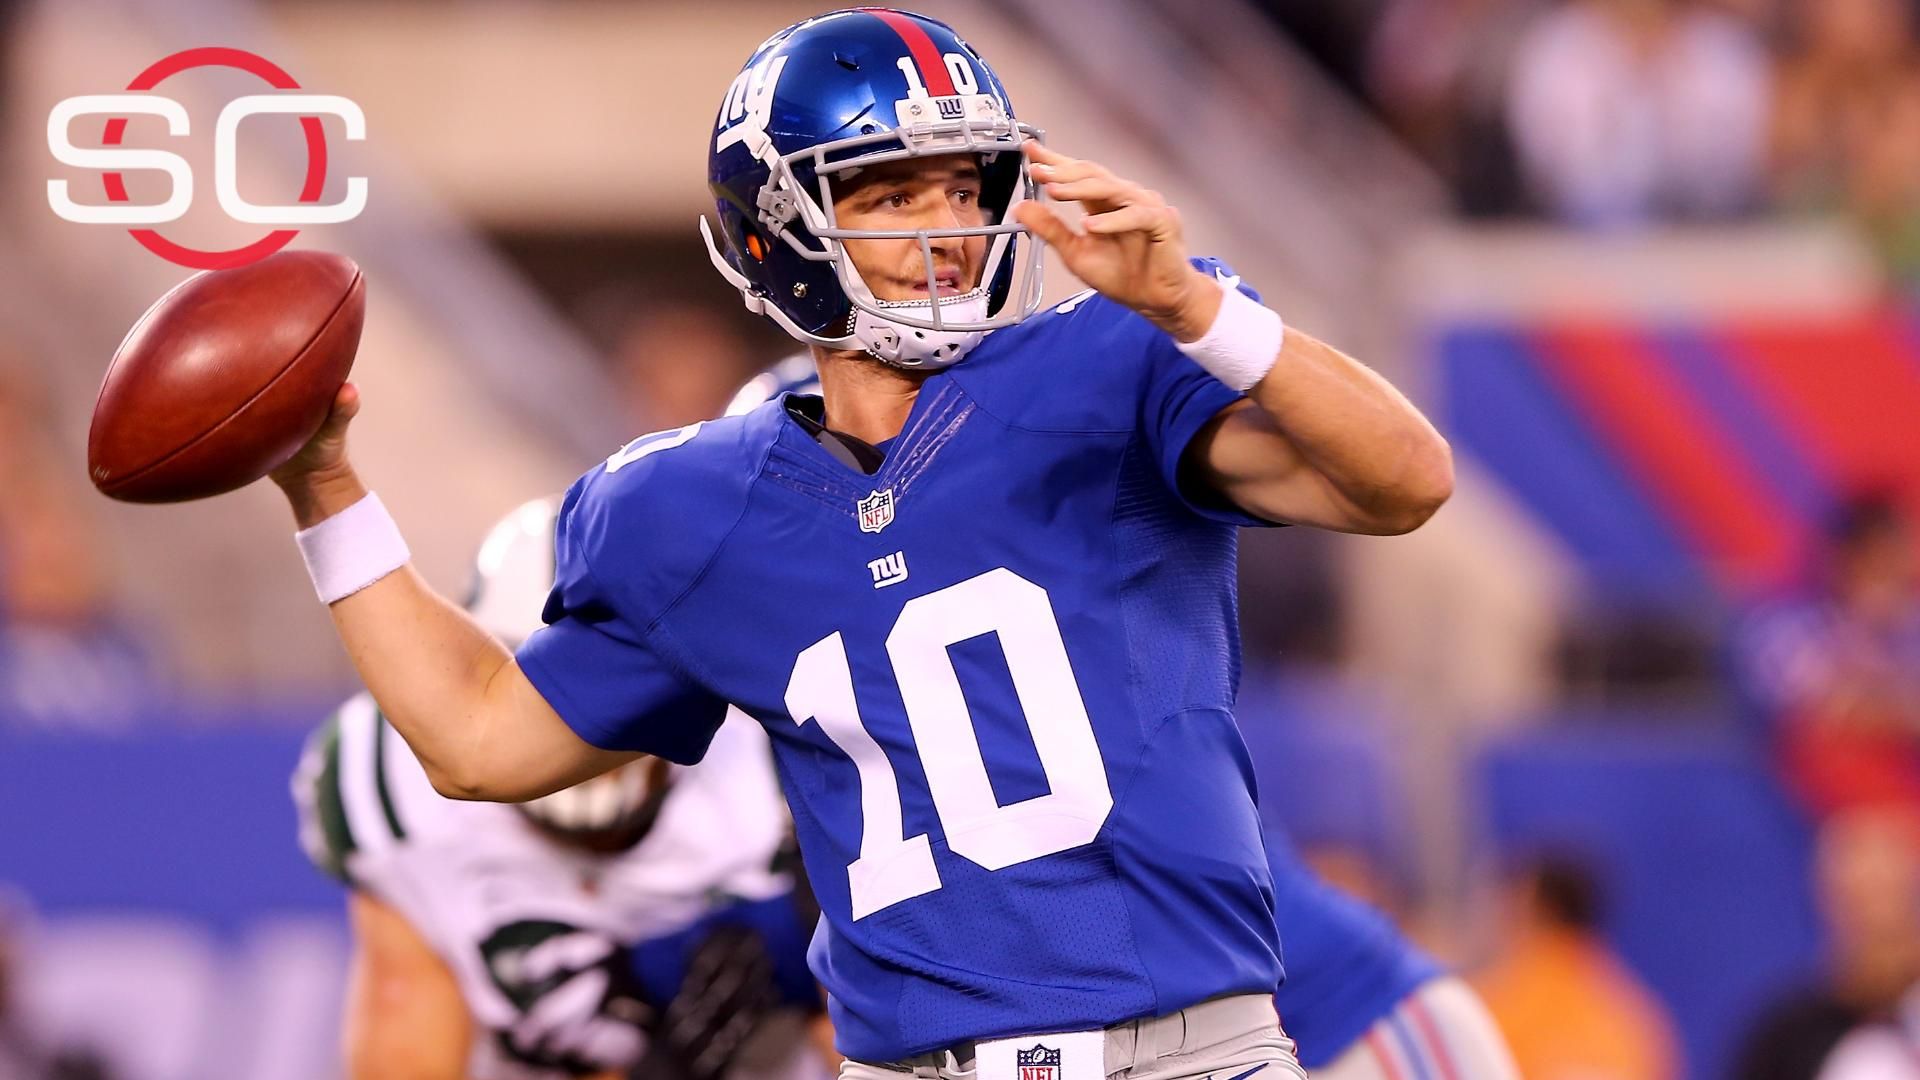 Manning and Giants Said to Agree on a 6-Year Extension - The New York Times